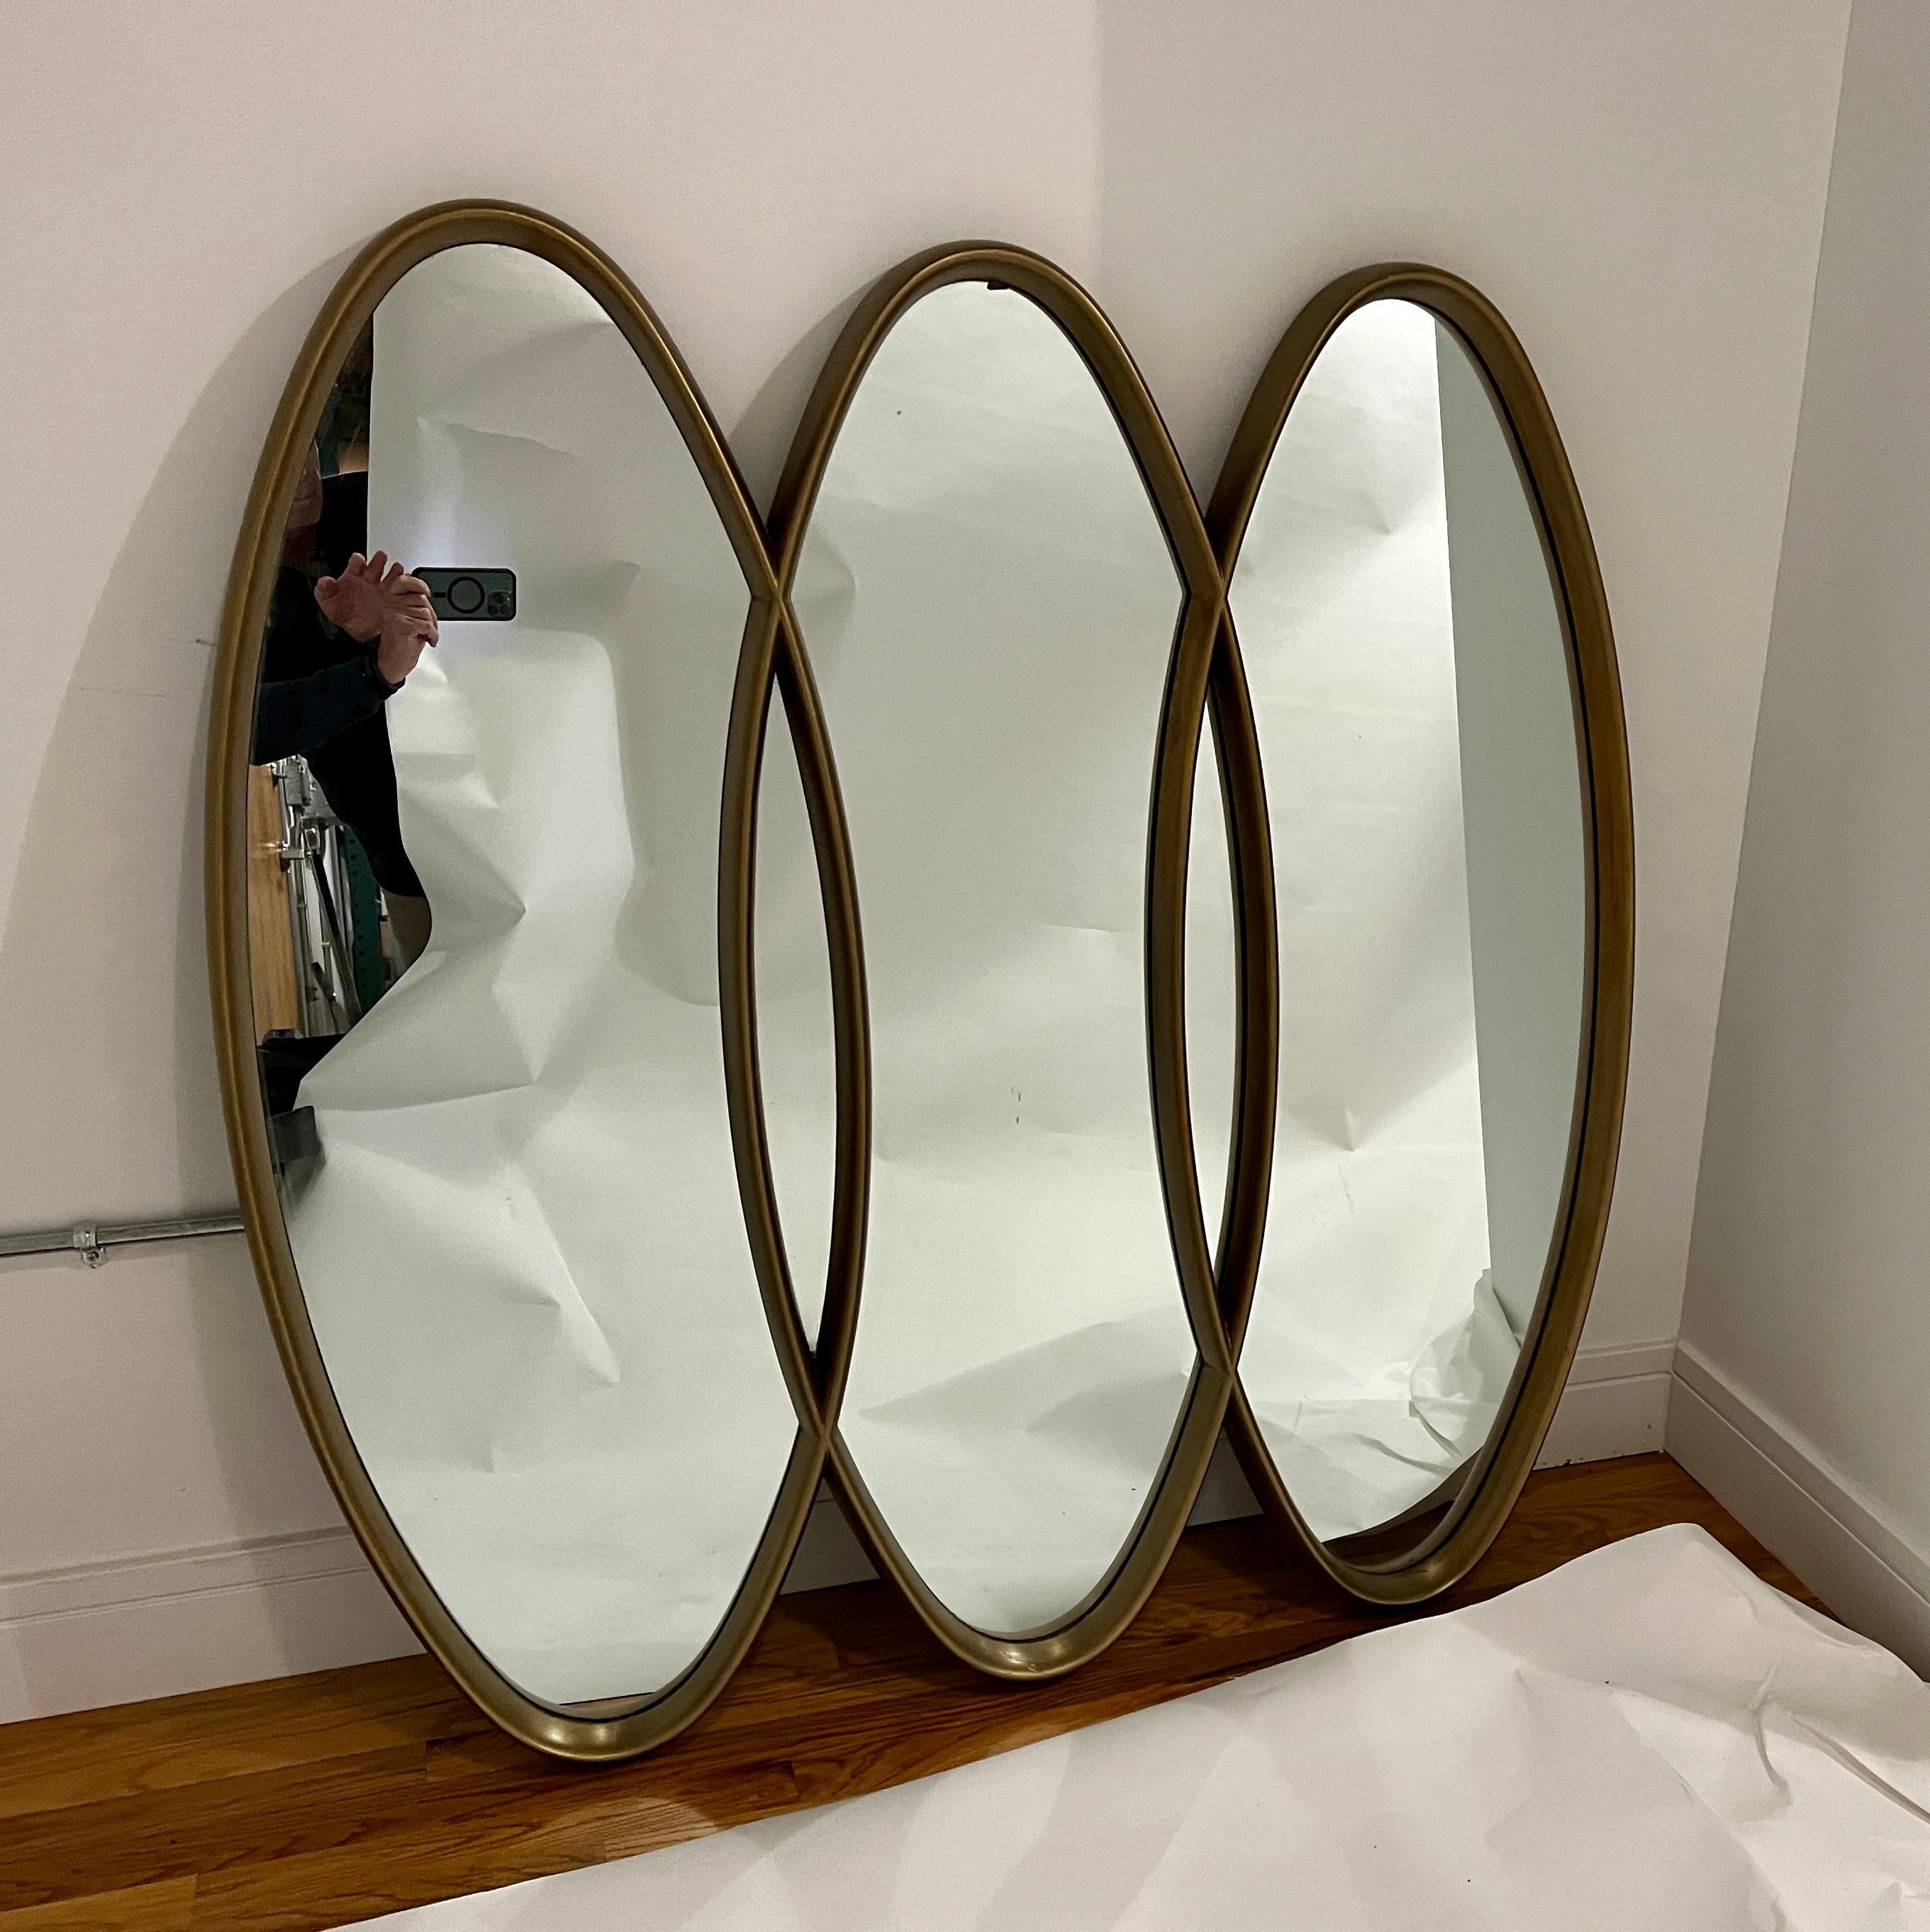 Hollywood Regency triple interlocking gold wood mirror by LaBarge dated 1962. Wired and ready to hang.